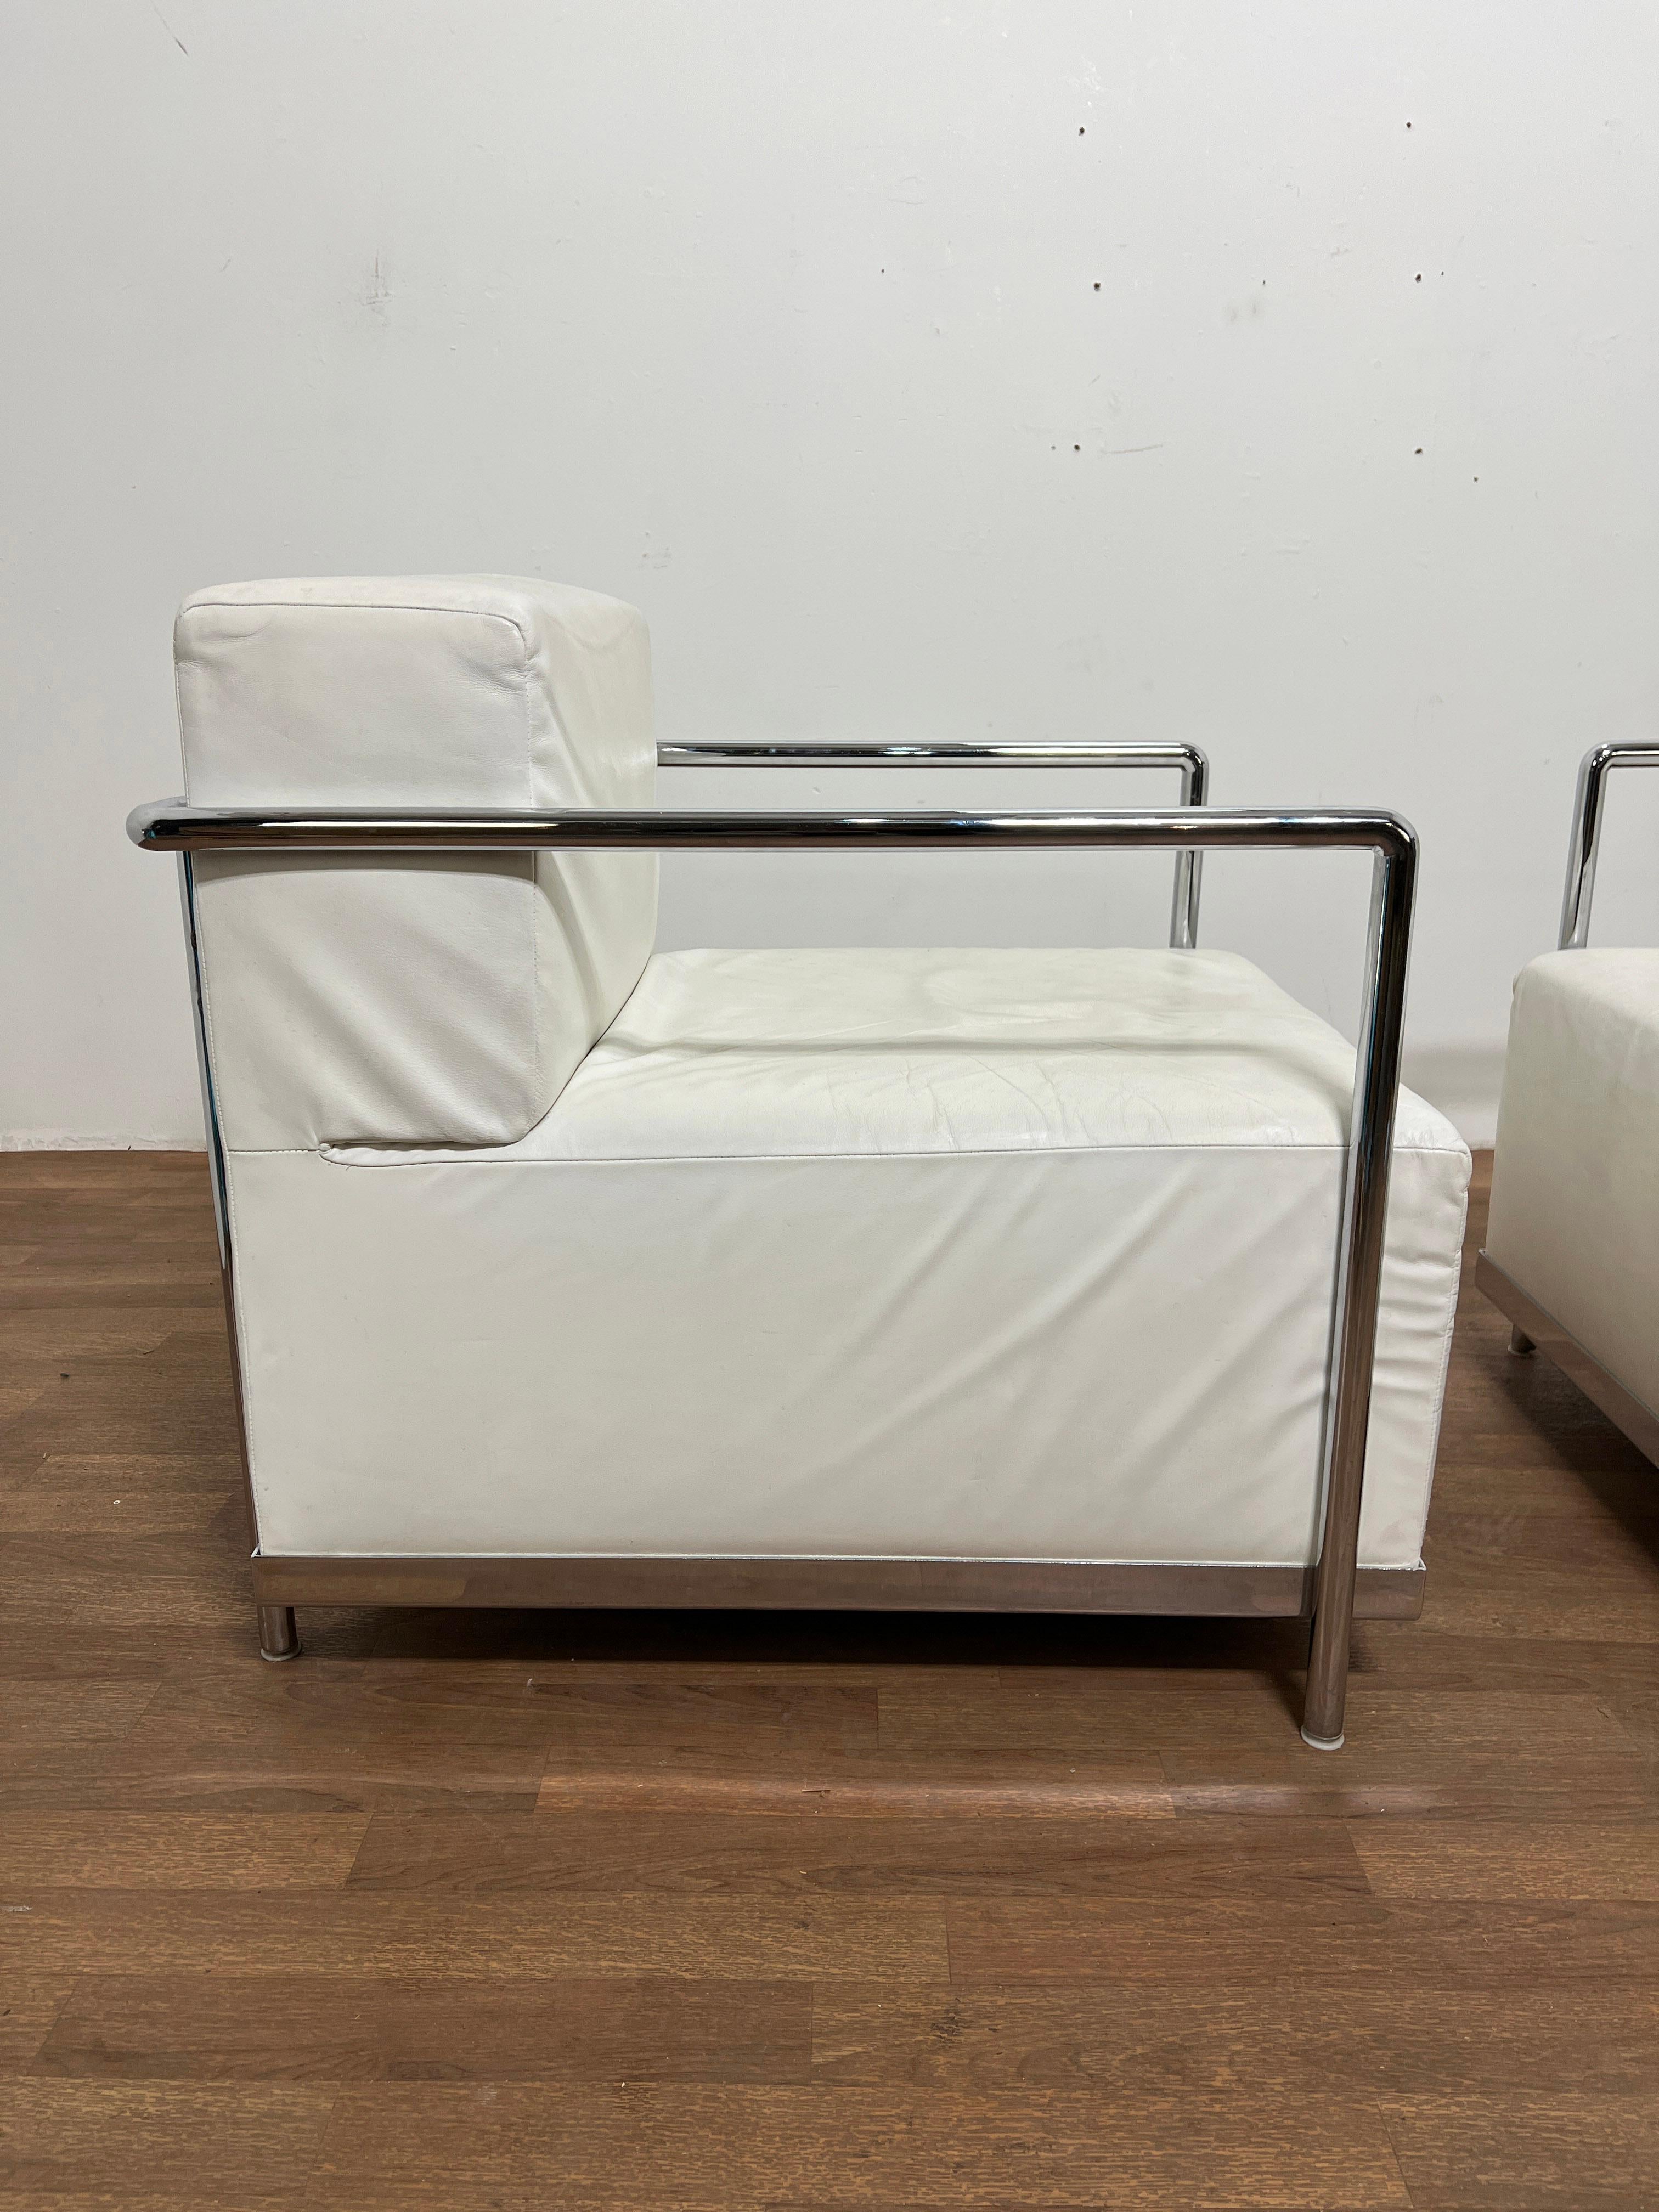 Pair of Post Modern Bauhaus Style Leather and Chrome Lounge Chairs by Bernhardt In Good Condition For Sale In Peabody, MA